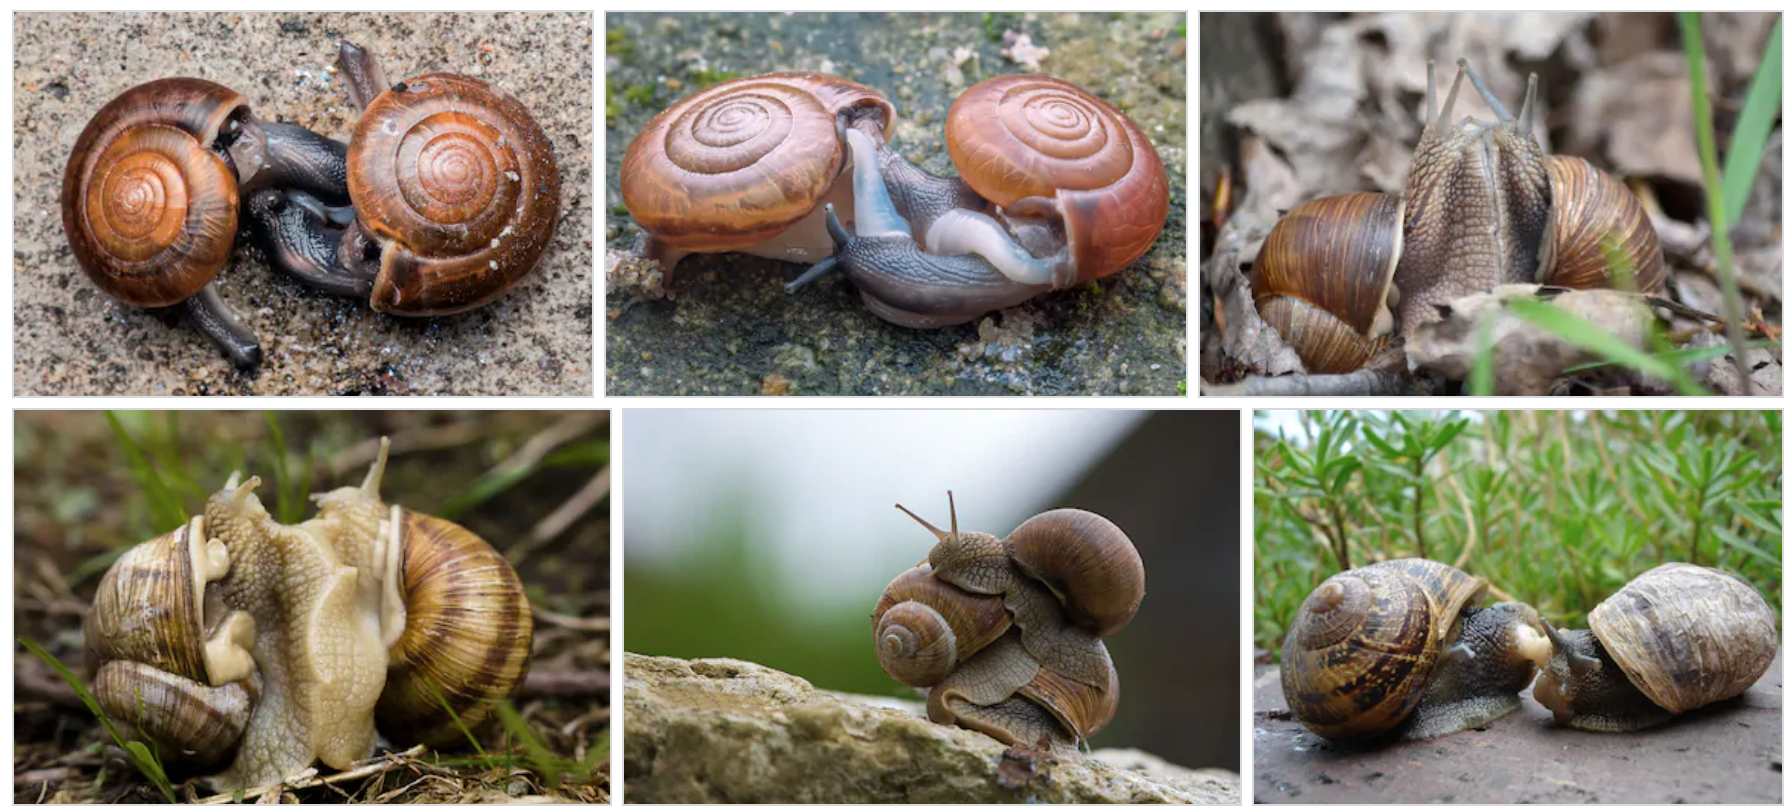 How long does it take for snails to reproduce?